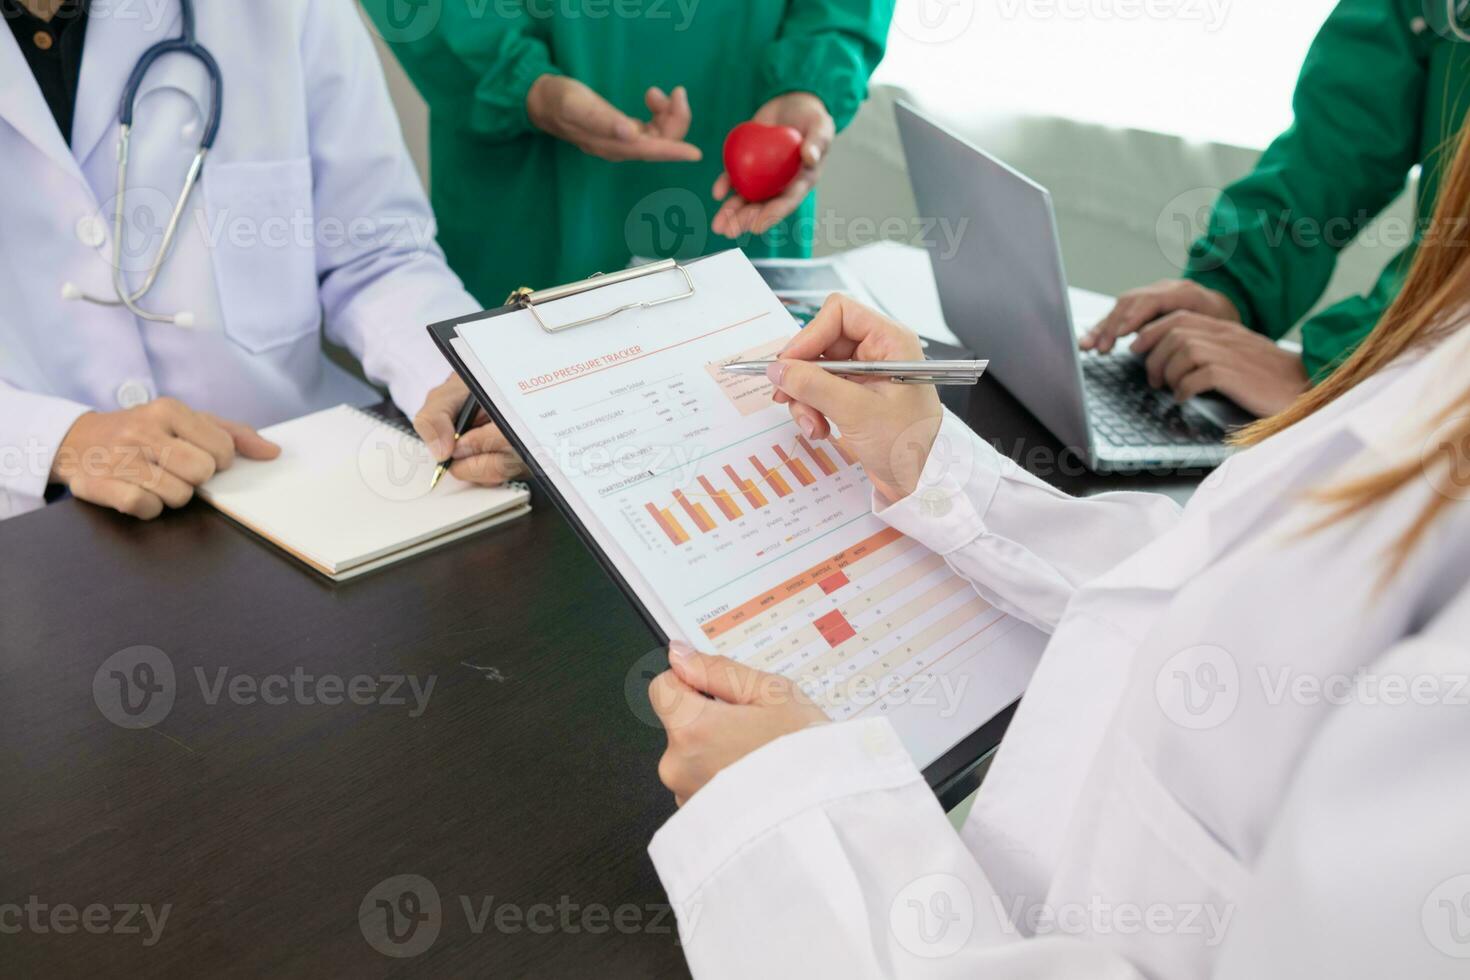 The doctor joins a meeting with the surgeon's team to discuss a plan for cancer surgery after the medical team detects cancer. Collaborative concept of a team doctors and surgeons in surgery. photo